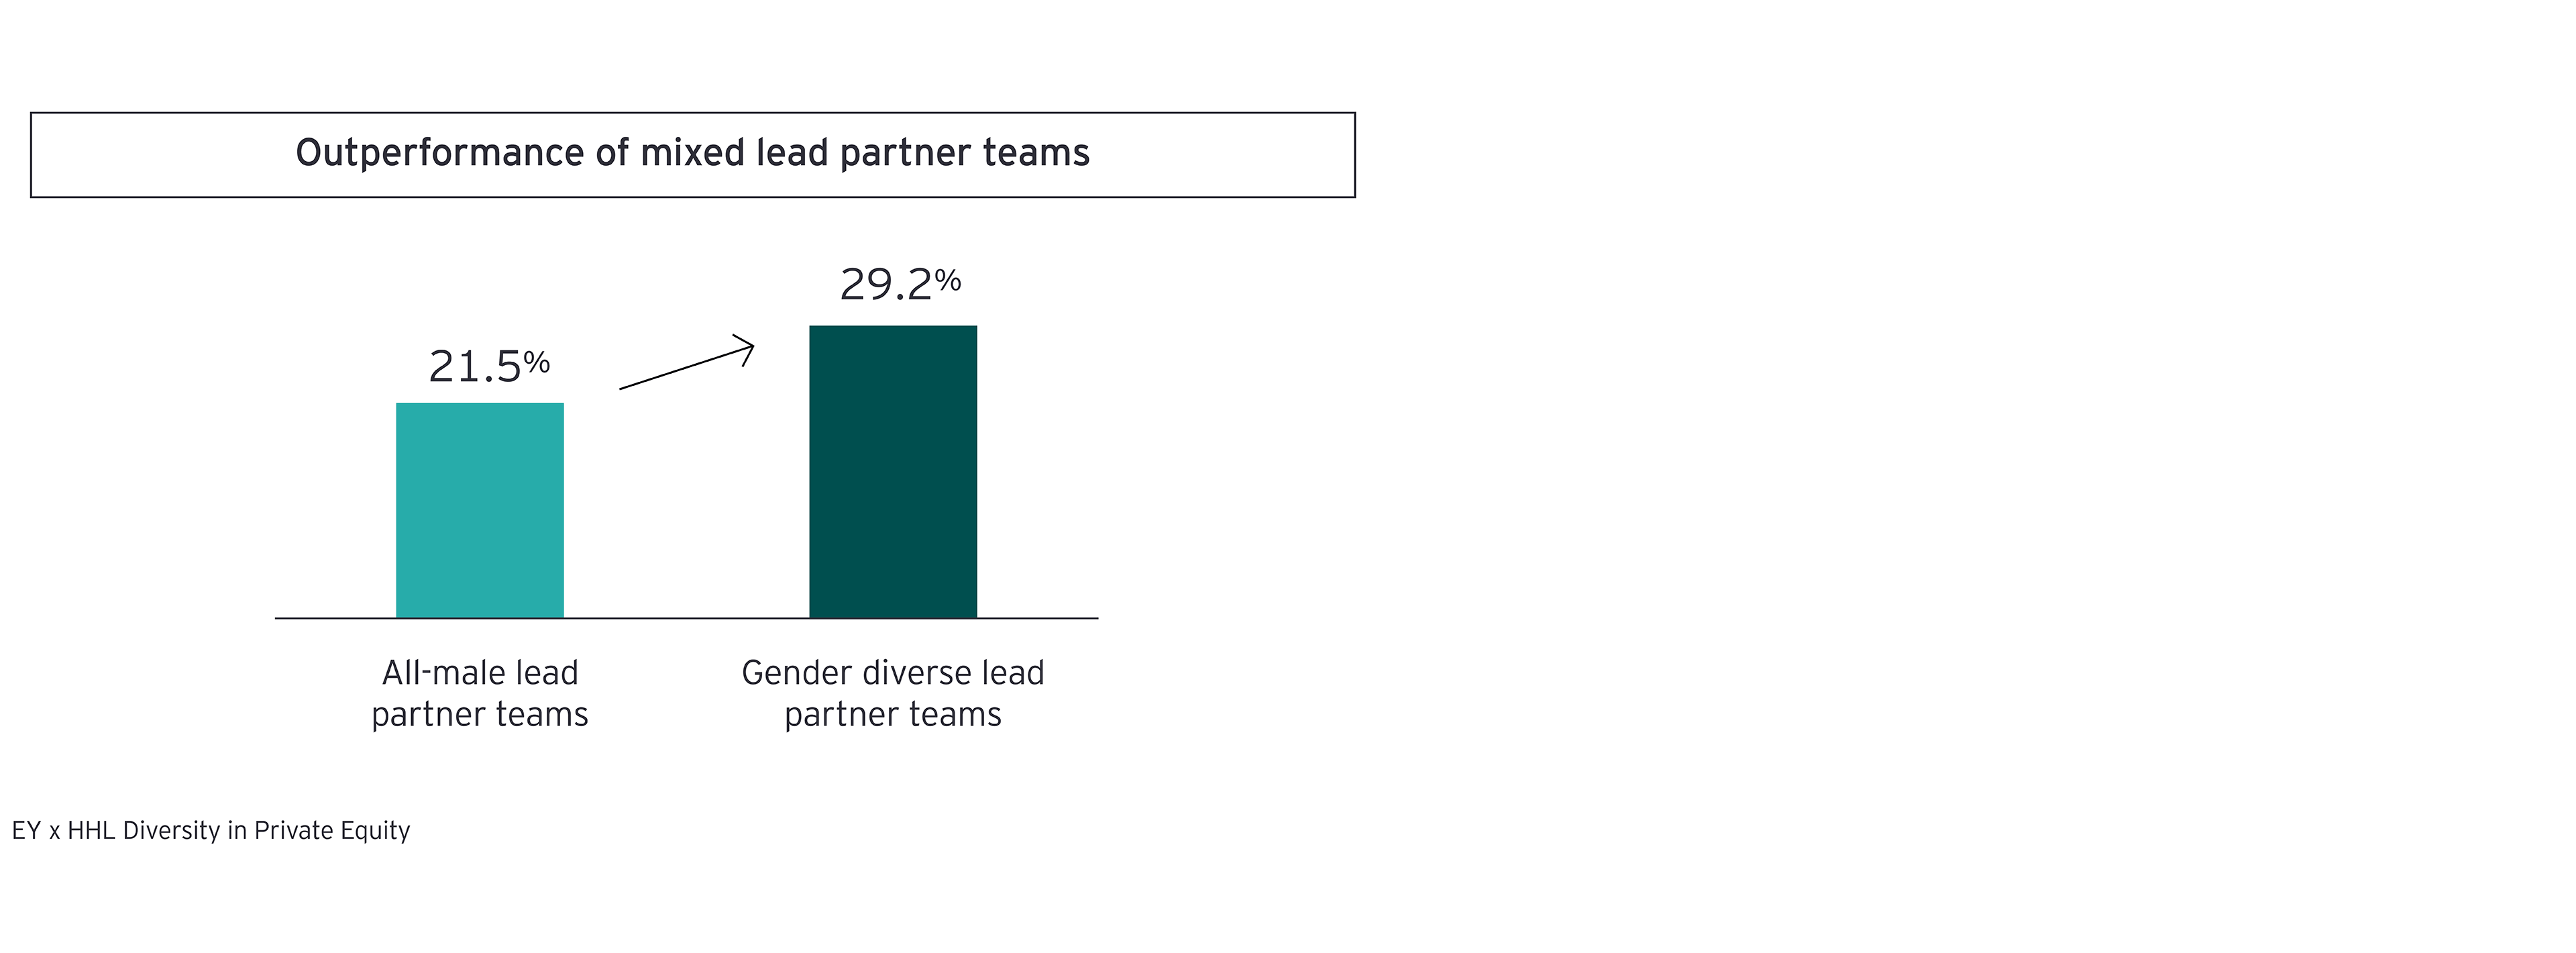 Outperformance of mixed lead partner teams